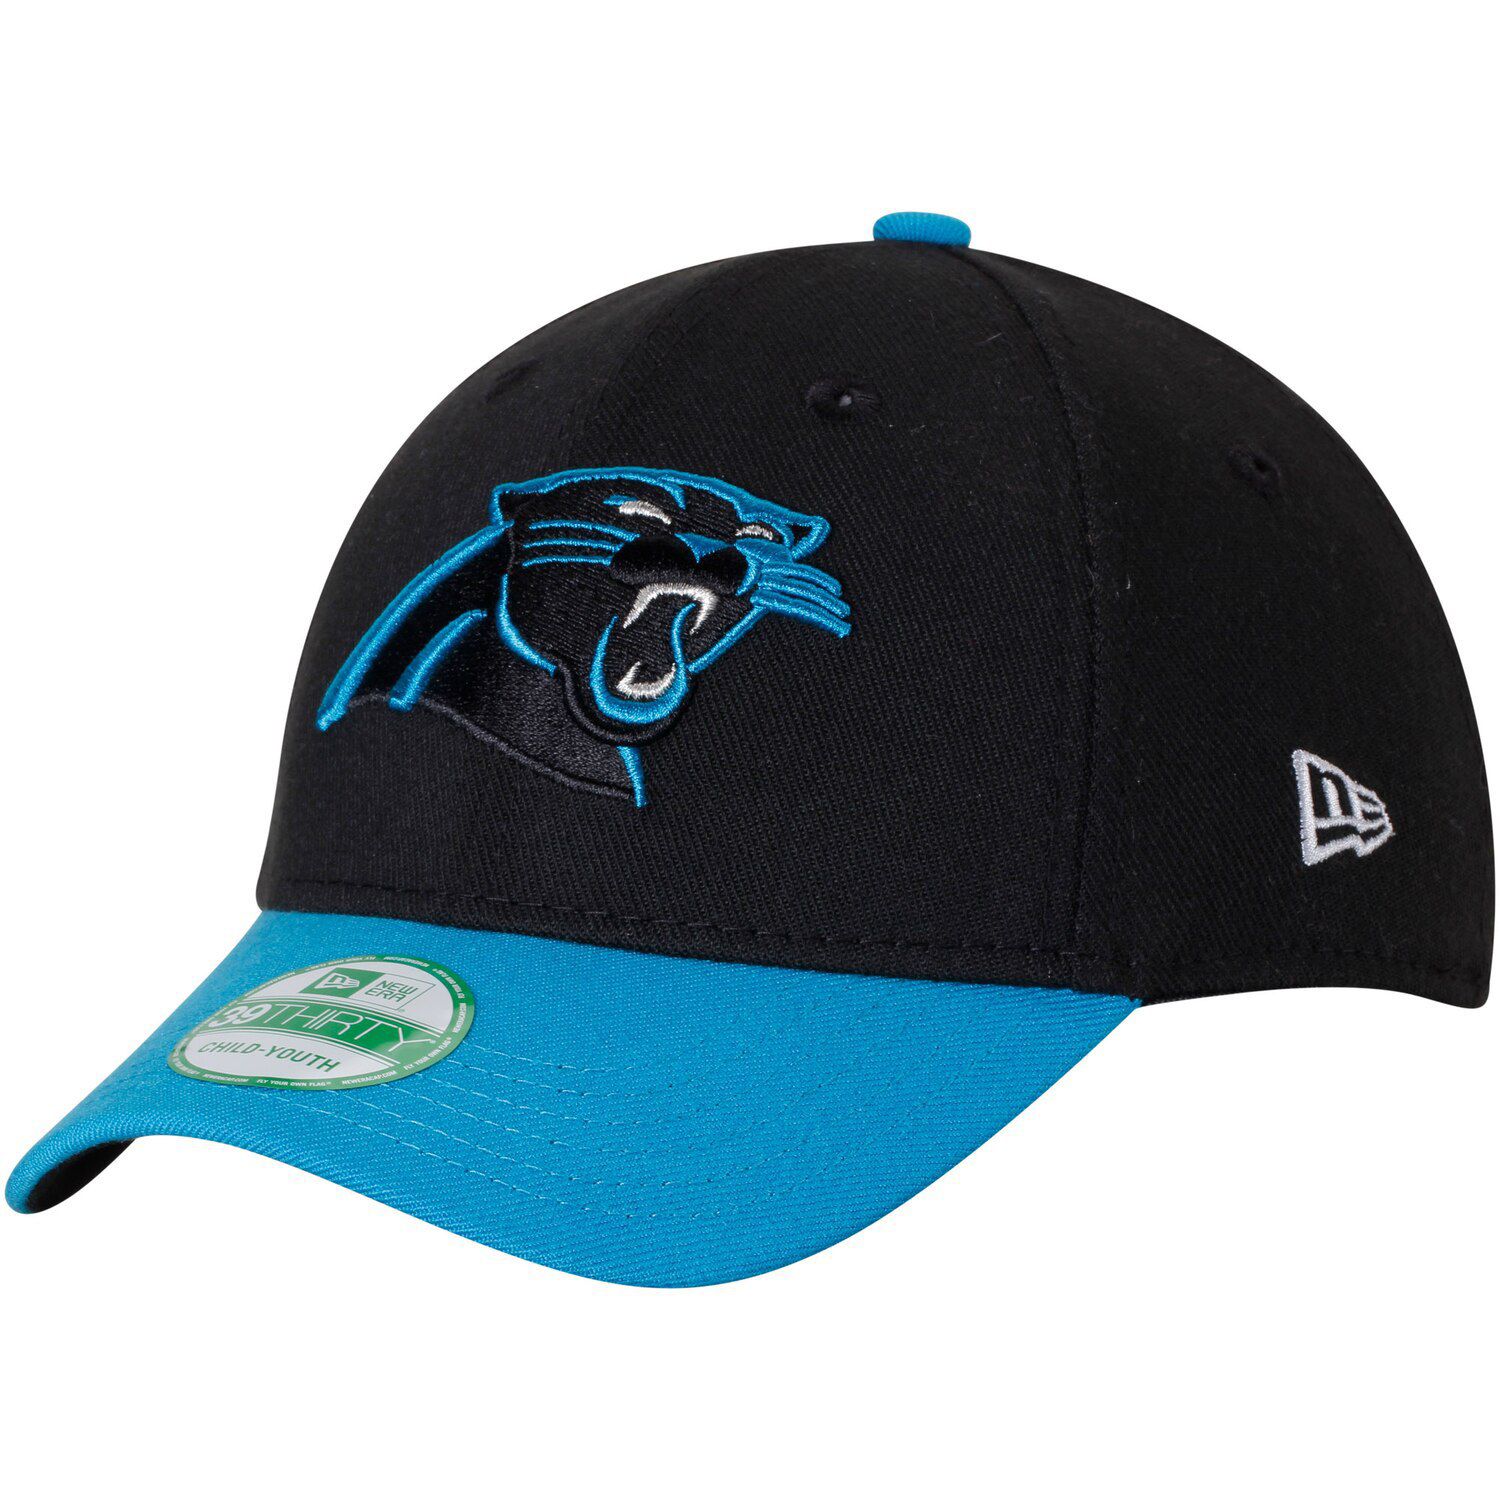 youth panthers hat